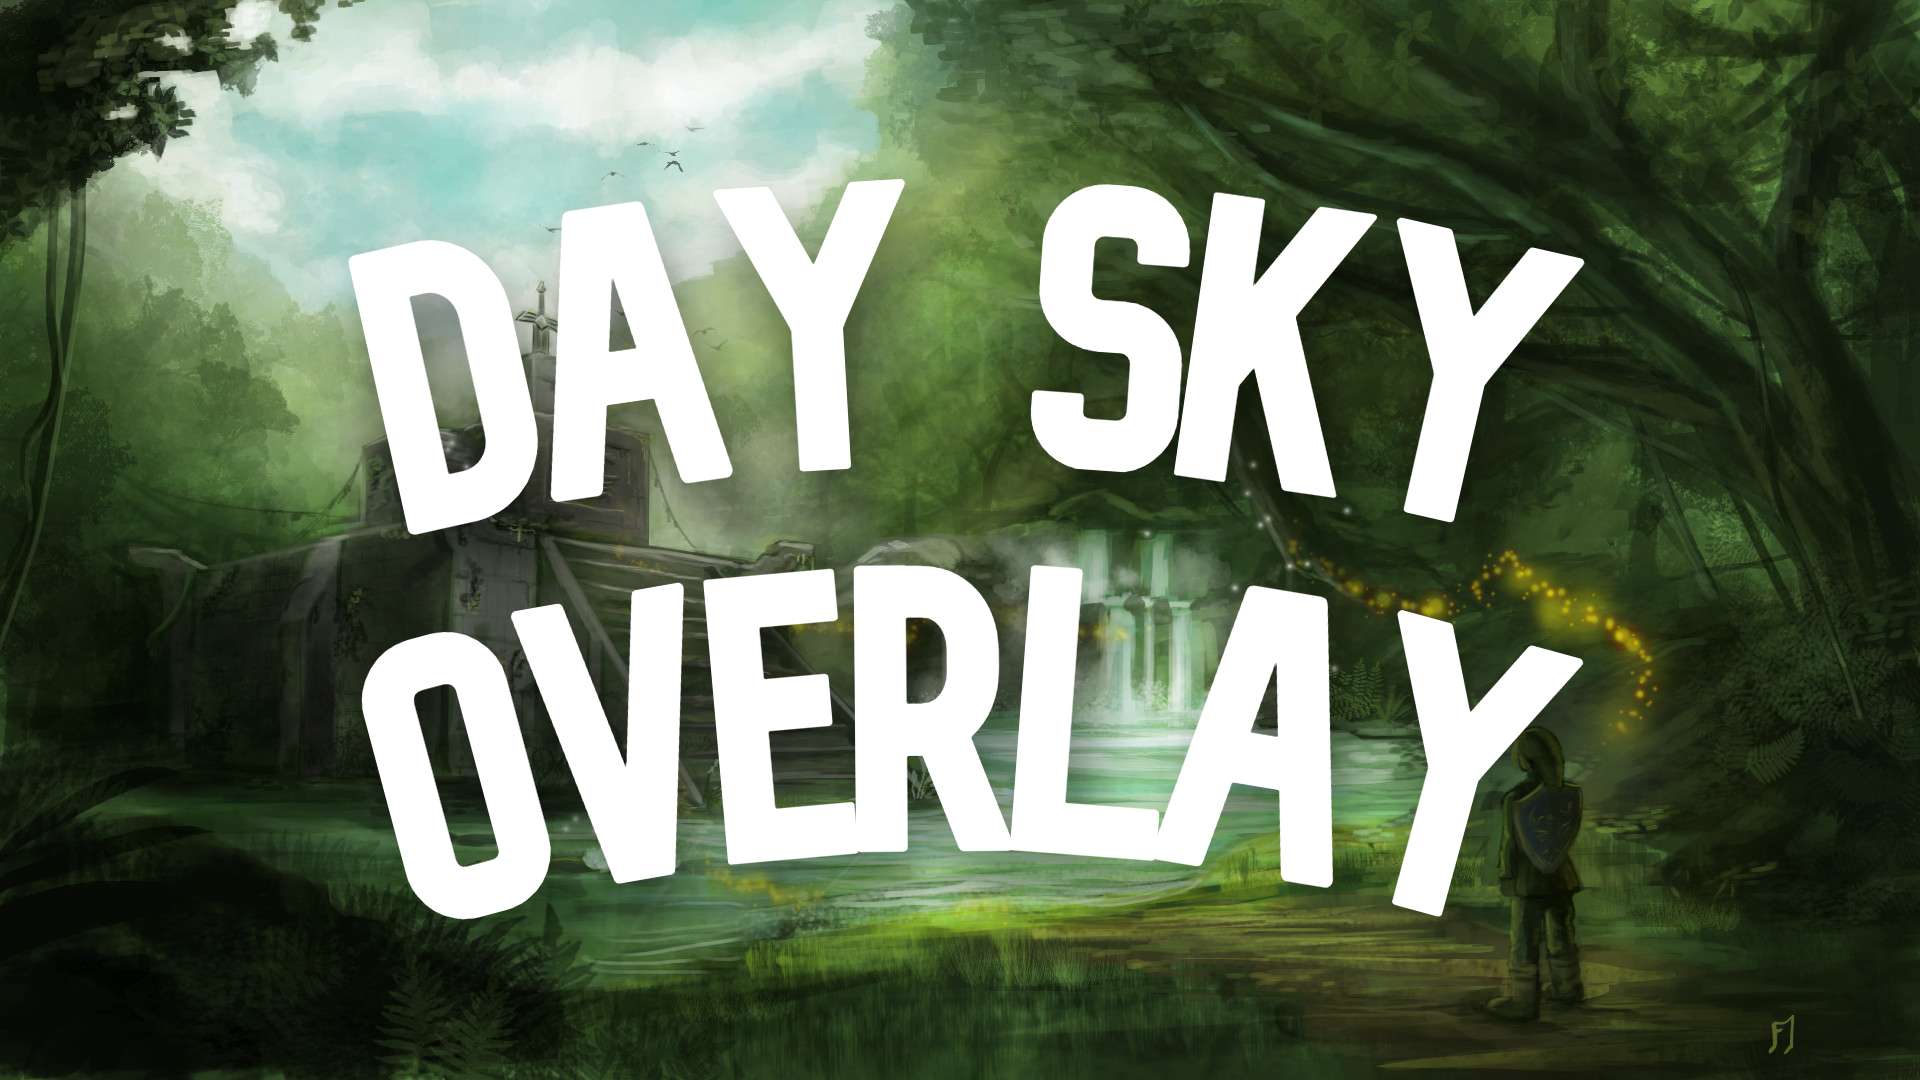 Day Sky Overlay #16 16x by rh56 on PvPRP